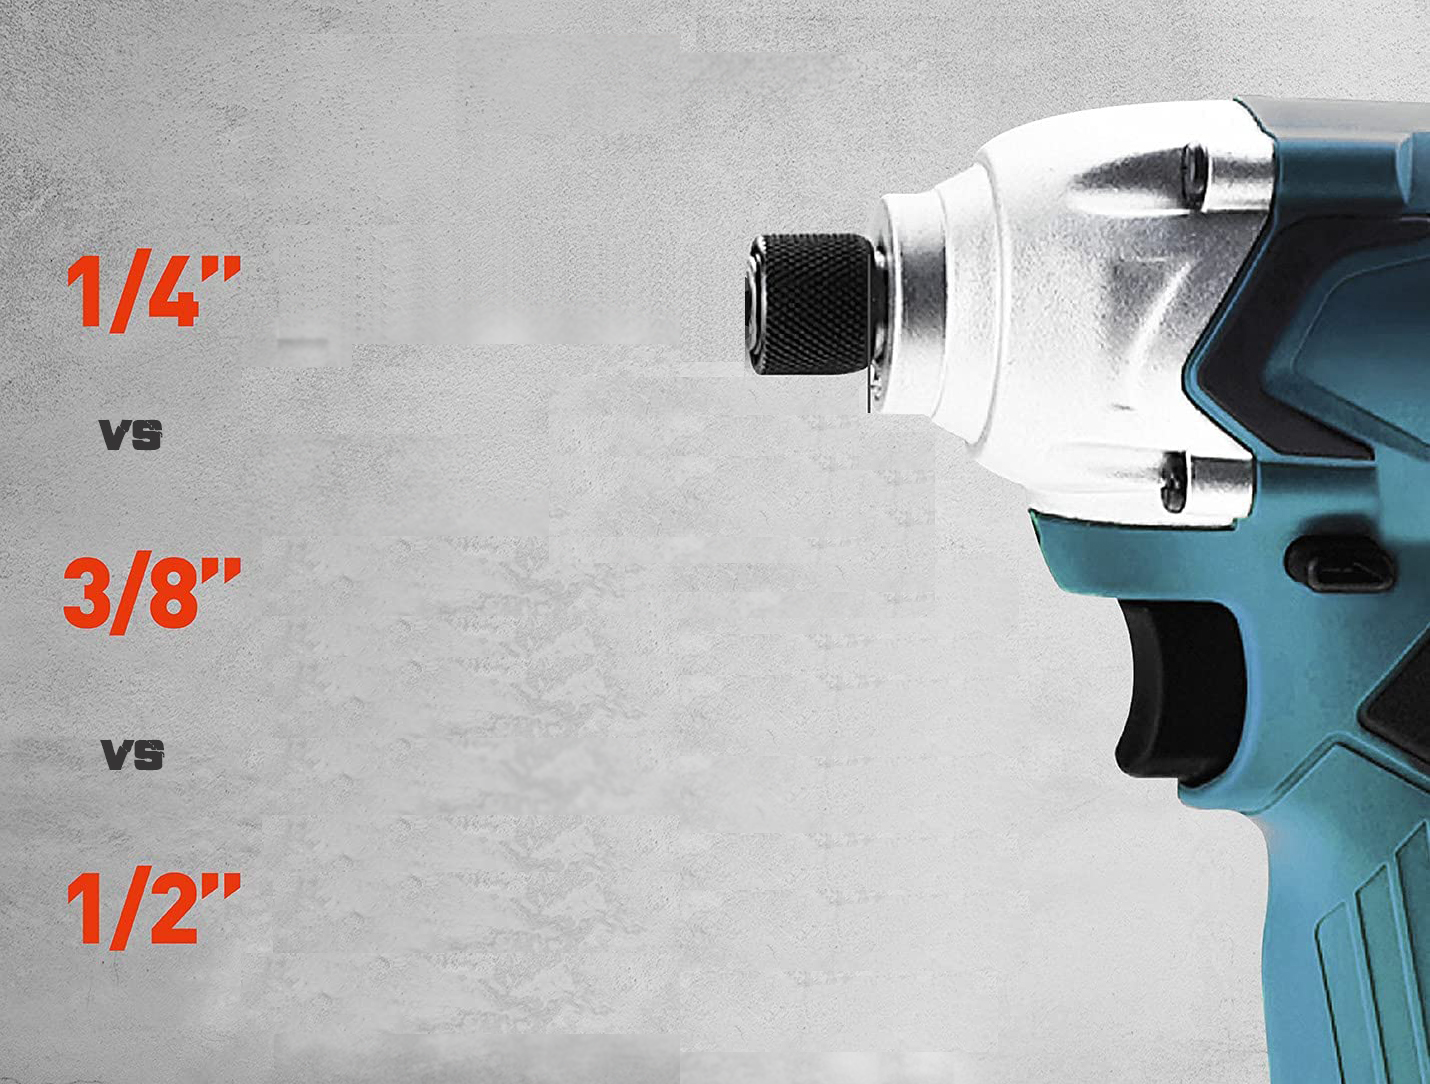 1/4 vs. 3/8 vs. 1/2 Impact Driver [Learn the Differences]